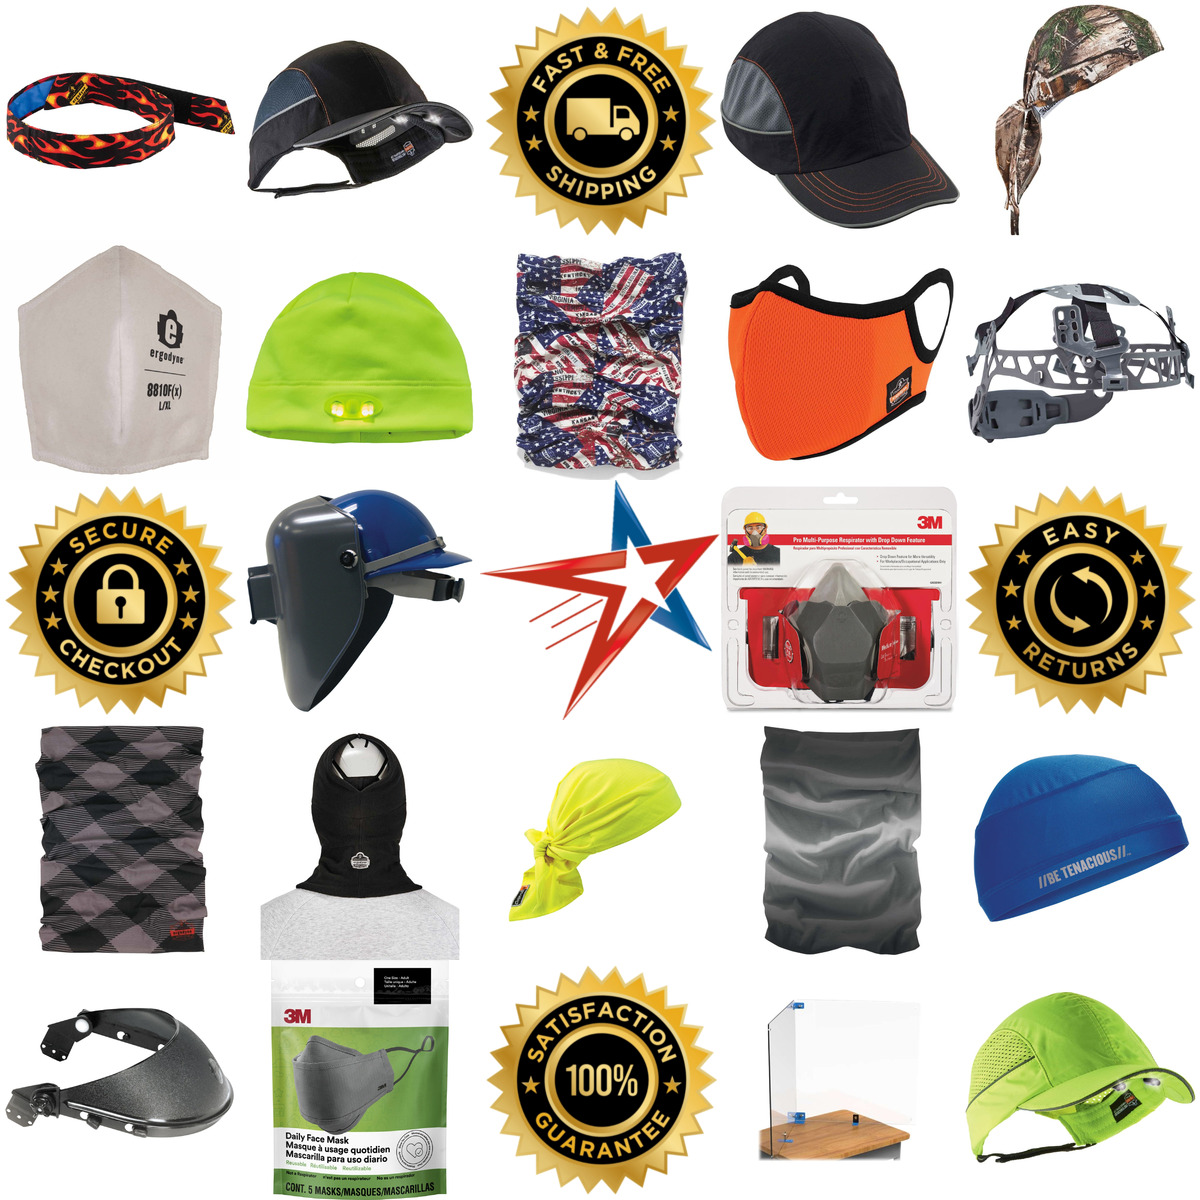 A selection of Head and Face Protection products on GoVets